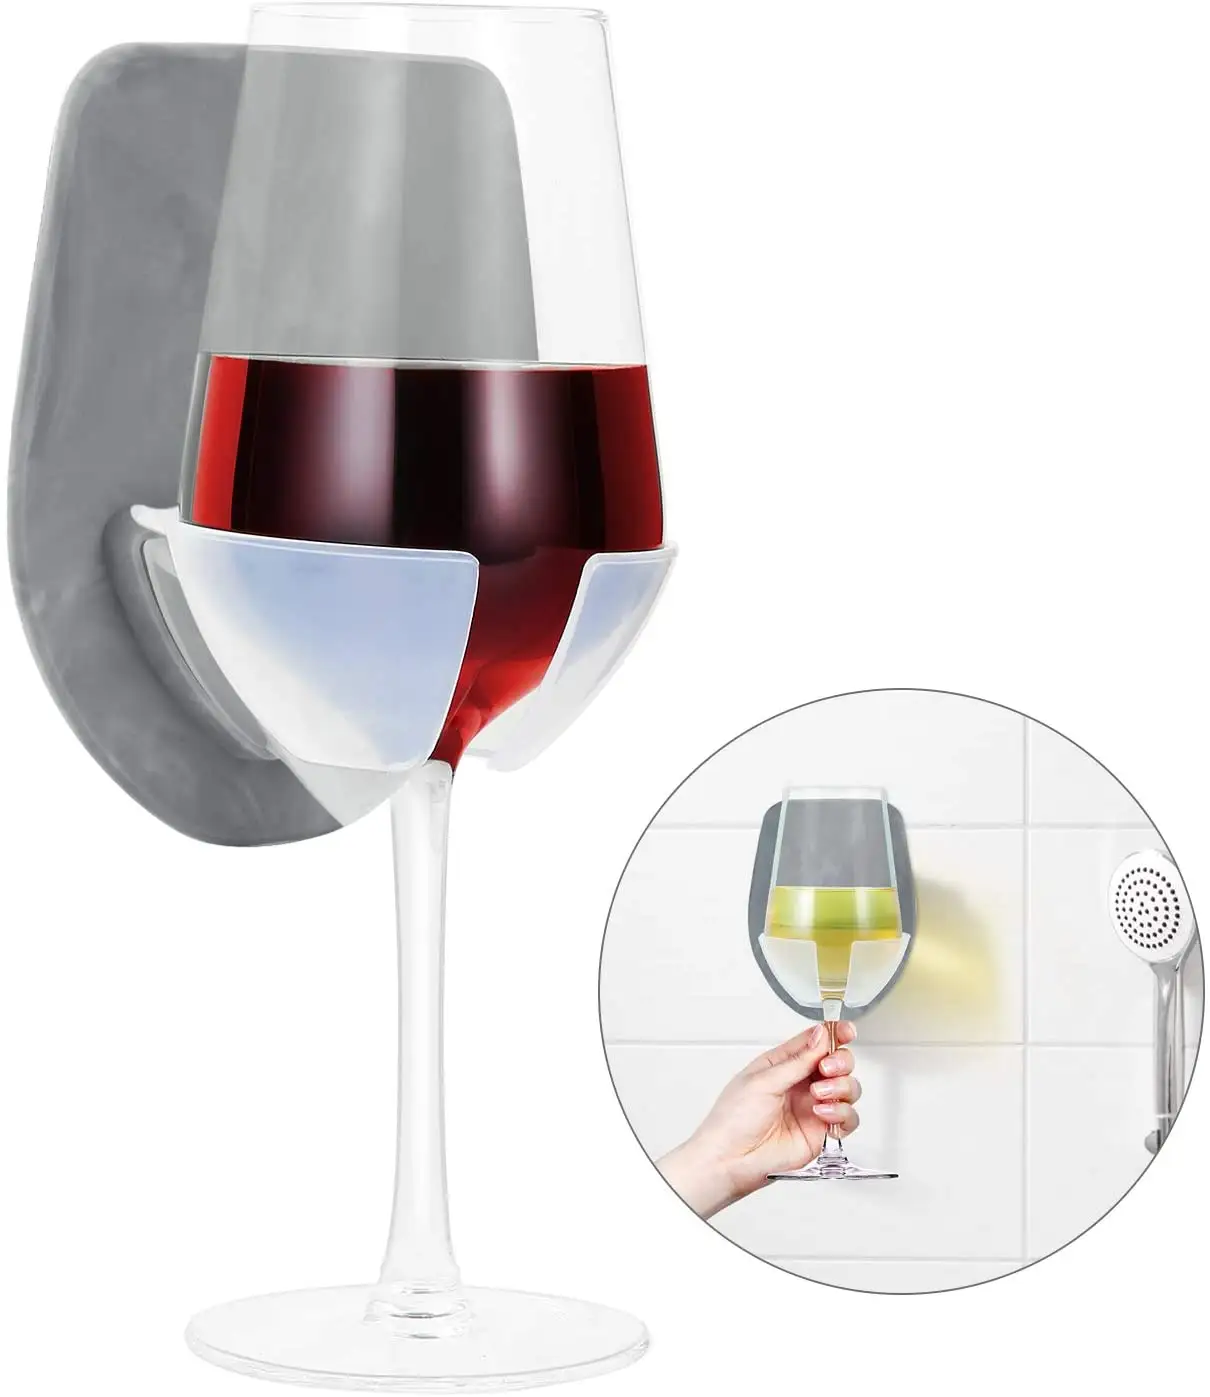 Suction cup Drink Holder